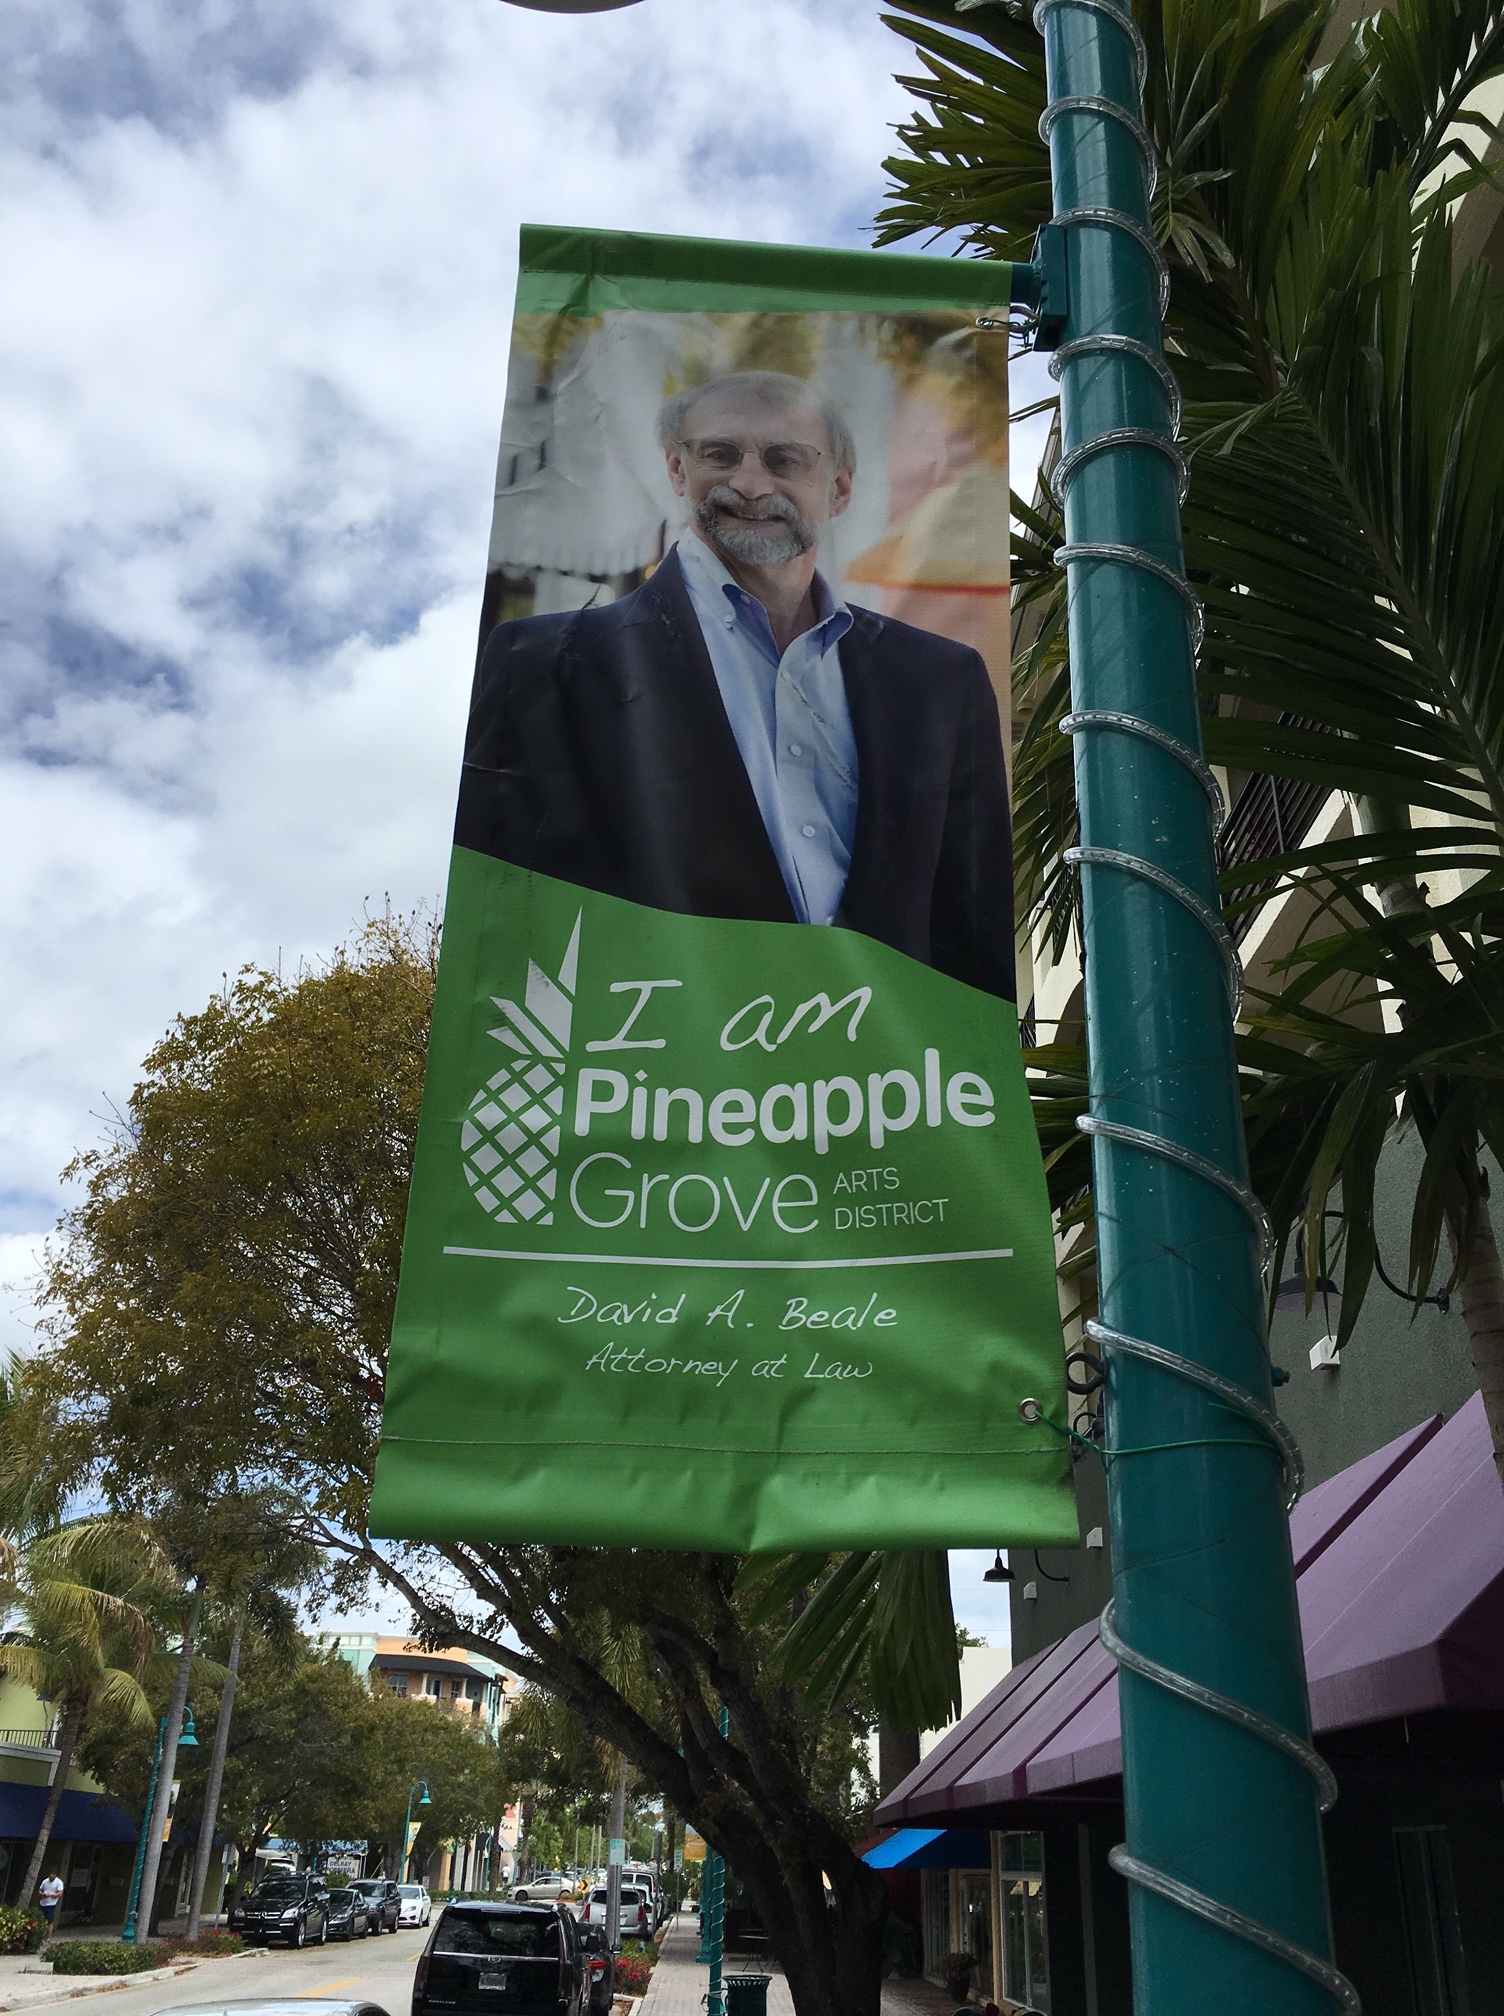 Pineapple Grove banner on a light pole with a photo of David A. Beale, lawyer.